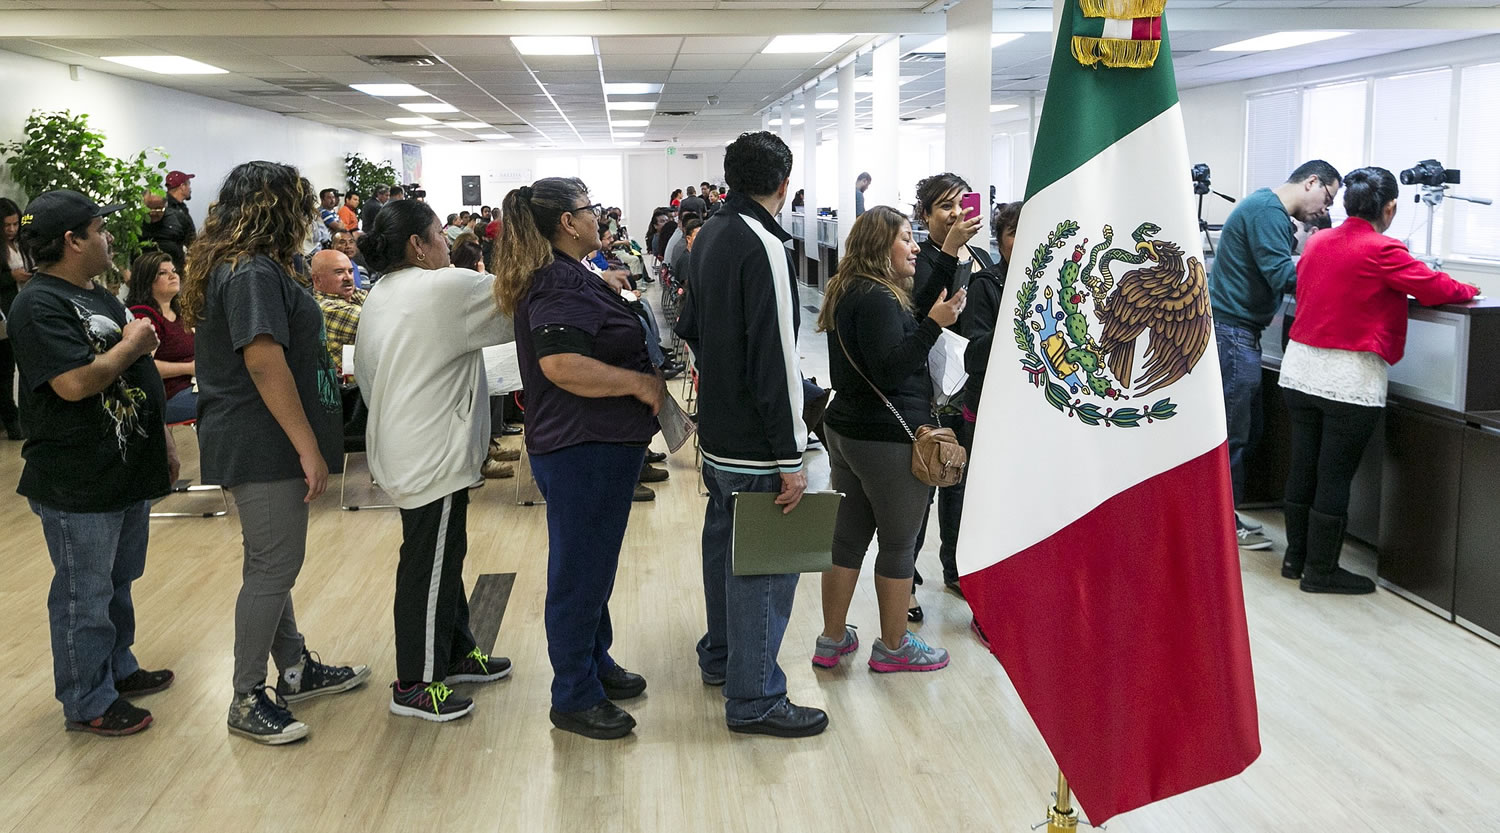 Mexicans citizens living in the U.S. wait in line to obtain their Mexican birth certificates at the Mexican consulate in Santa Ana, Calif., Thursday, Jan. 15, 2015. On Thursday, the Mexican government began issuing birth certificates to its citizens at its consulates in the United States. That will make it a little easier for Mexicans hoping to obtain U.S.